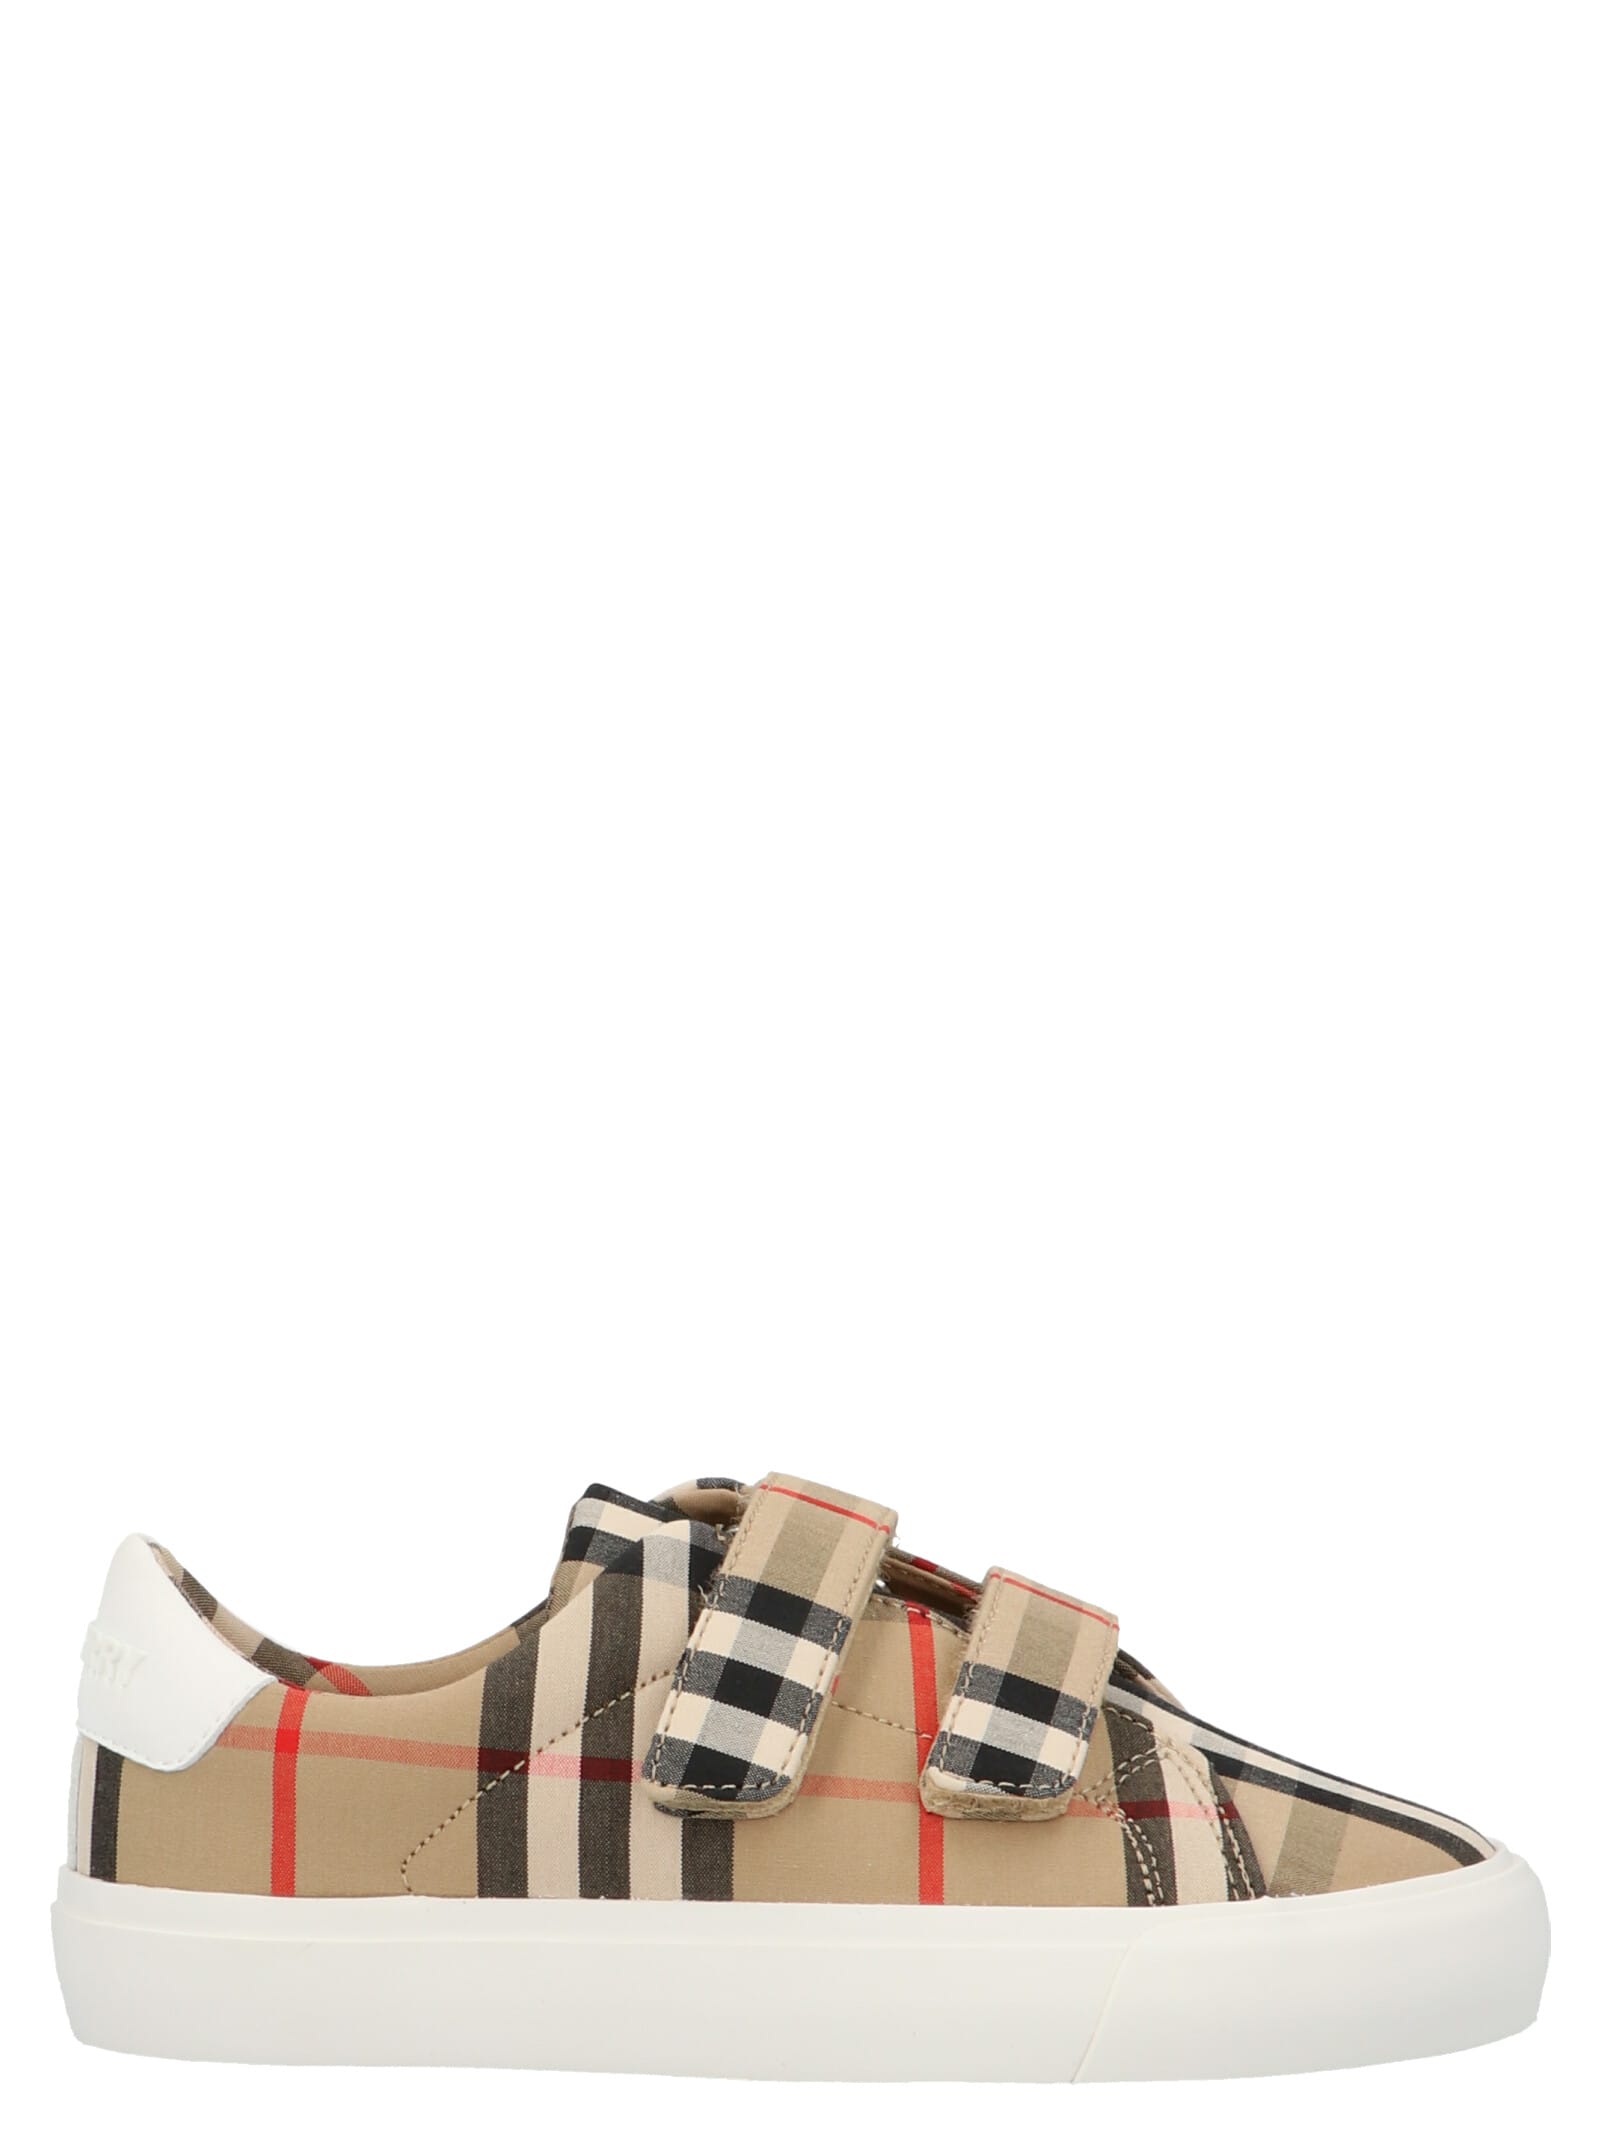 Burberry Shoes | italist, ALWAYS LIKE A 